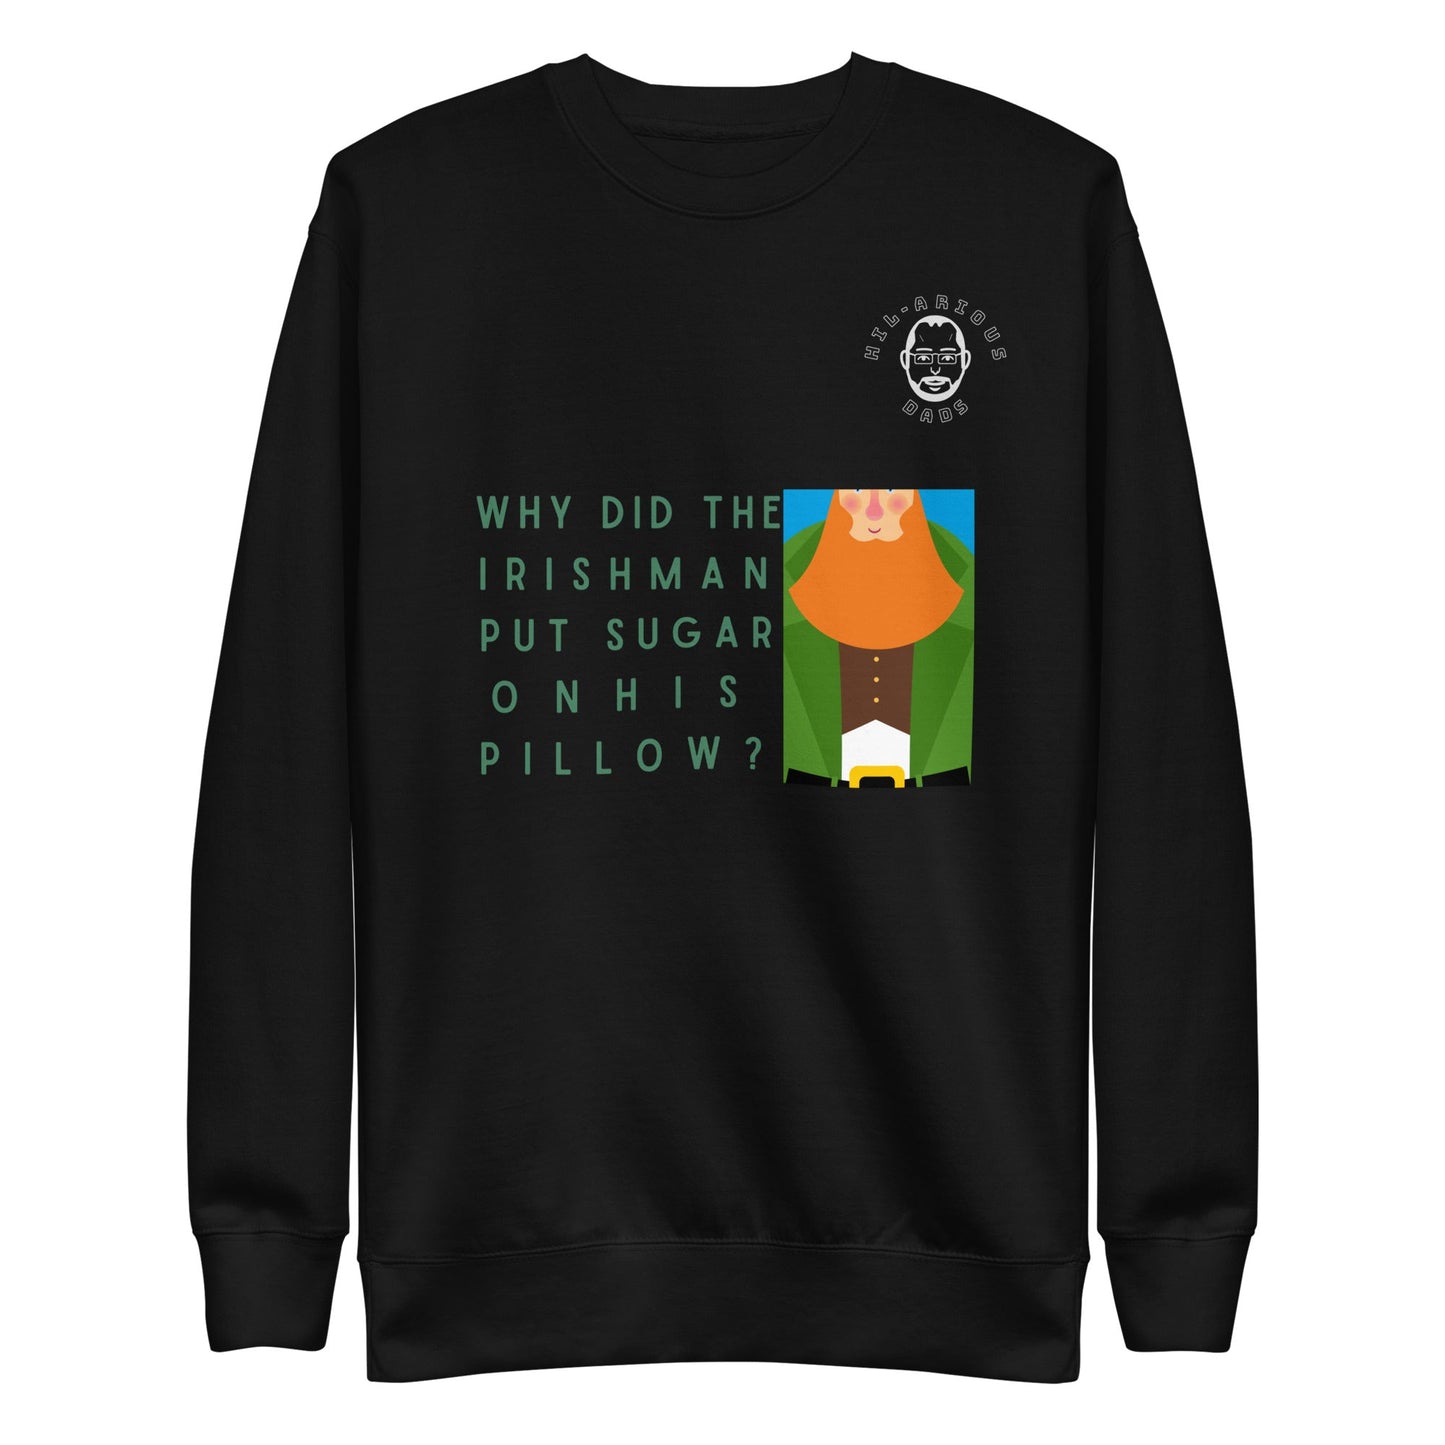 Why did the Irishman put sugar on his pillow?-Sweatshirt - Hil-arious Dads